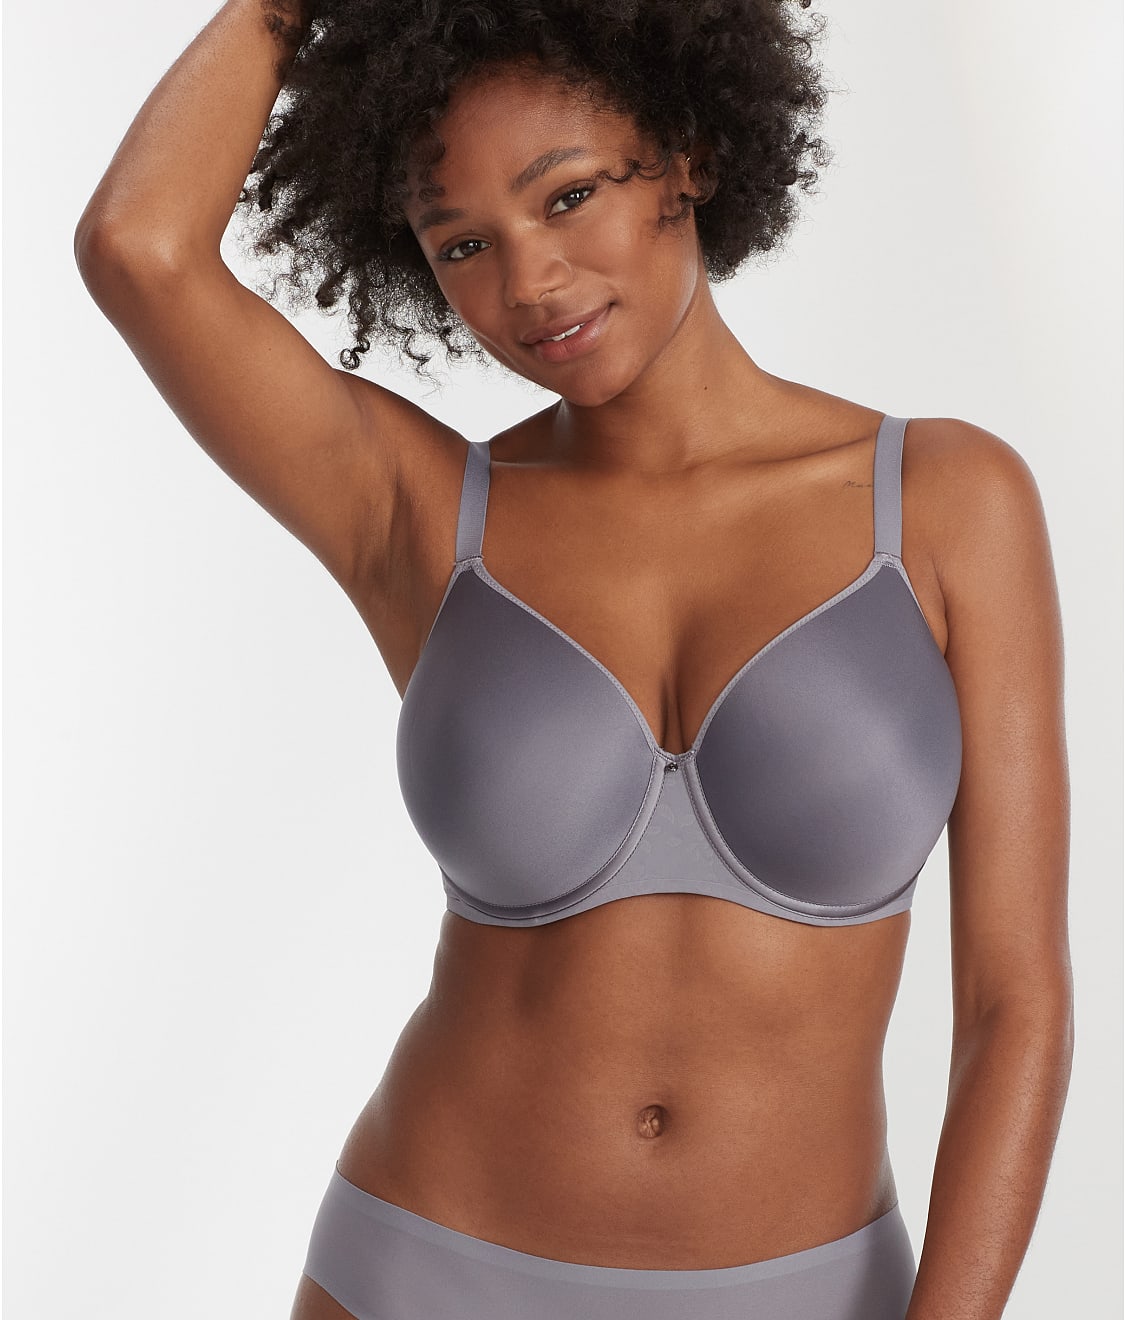 Moulded-cup full-coverage sports bra, Chantelle, Shop Full-Busted Bras  online